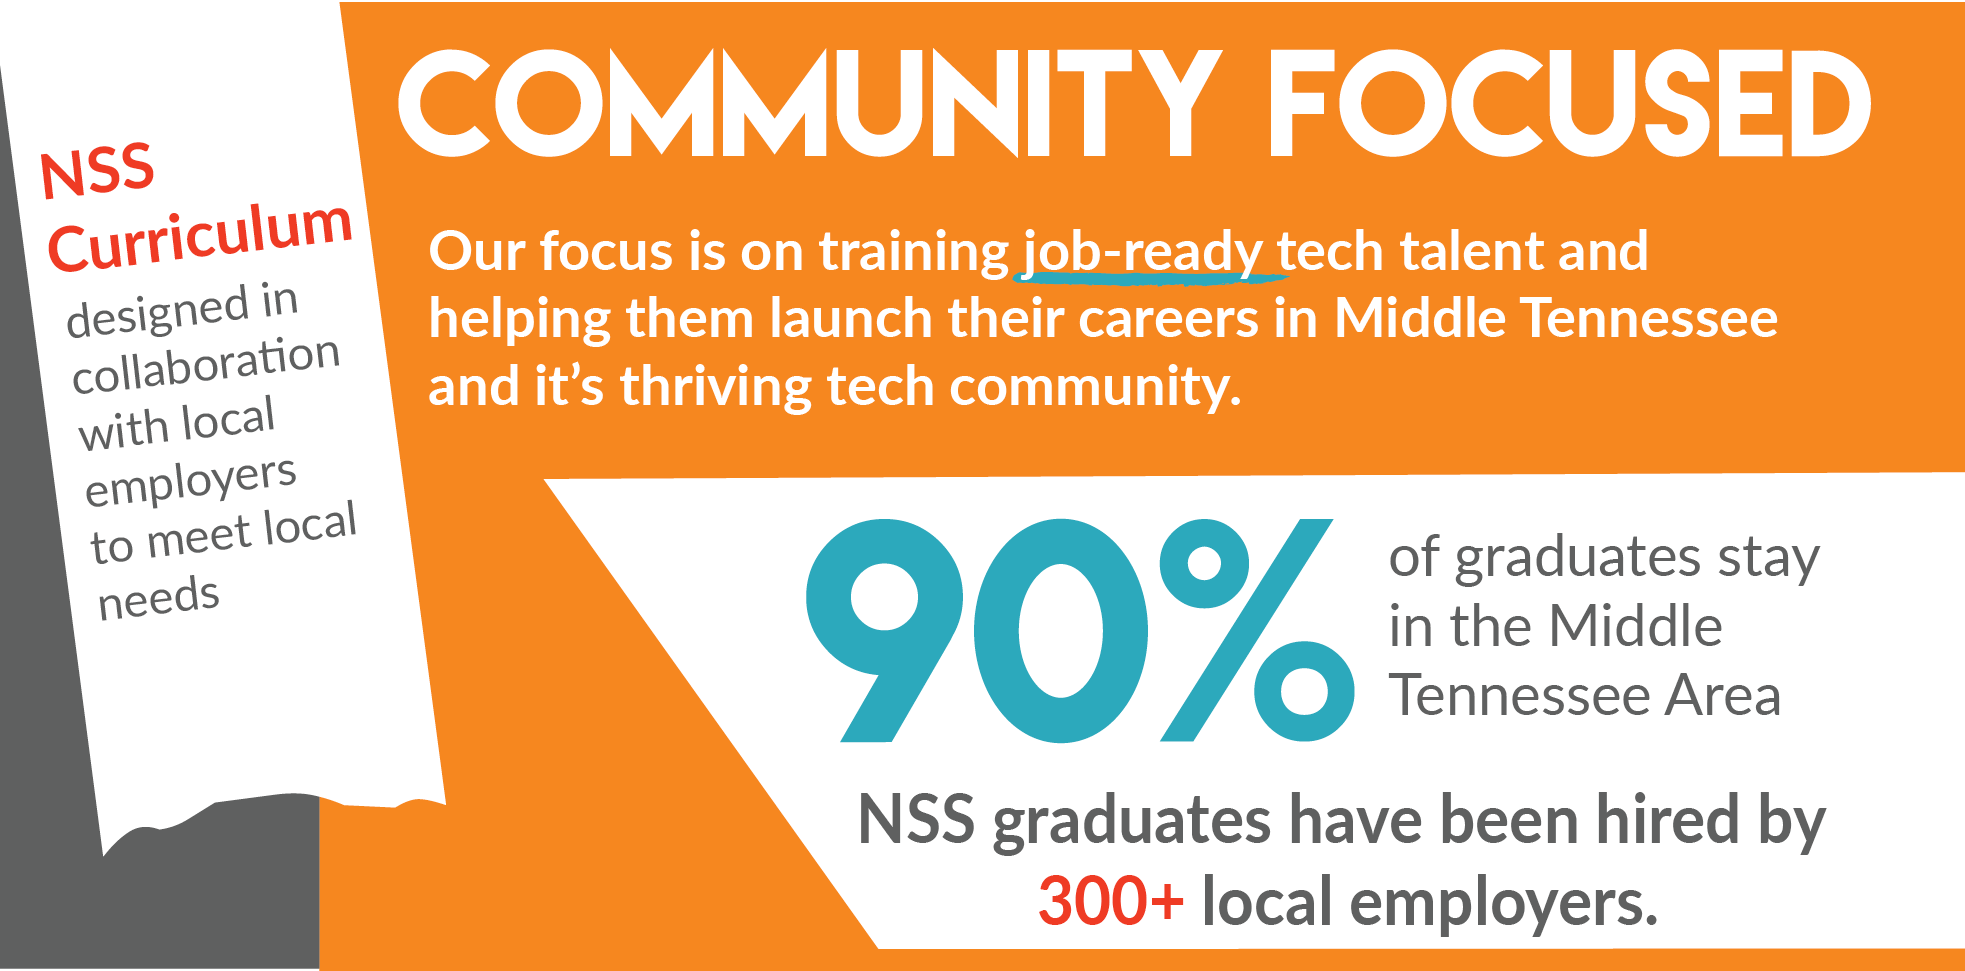 Community Focused - 90% of graduates stay in the Middle Tennessee area